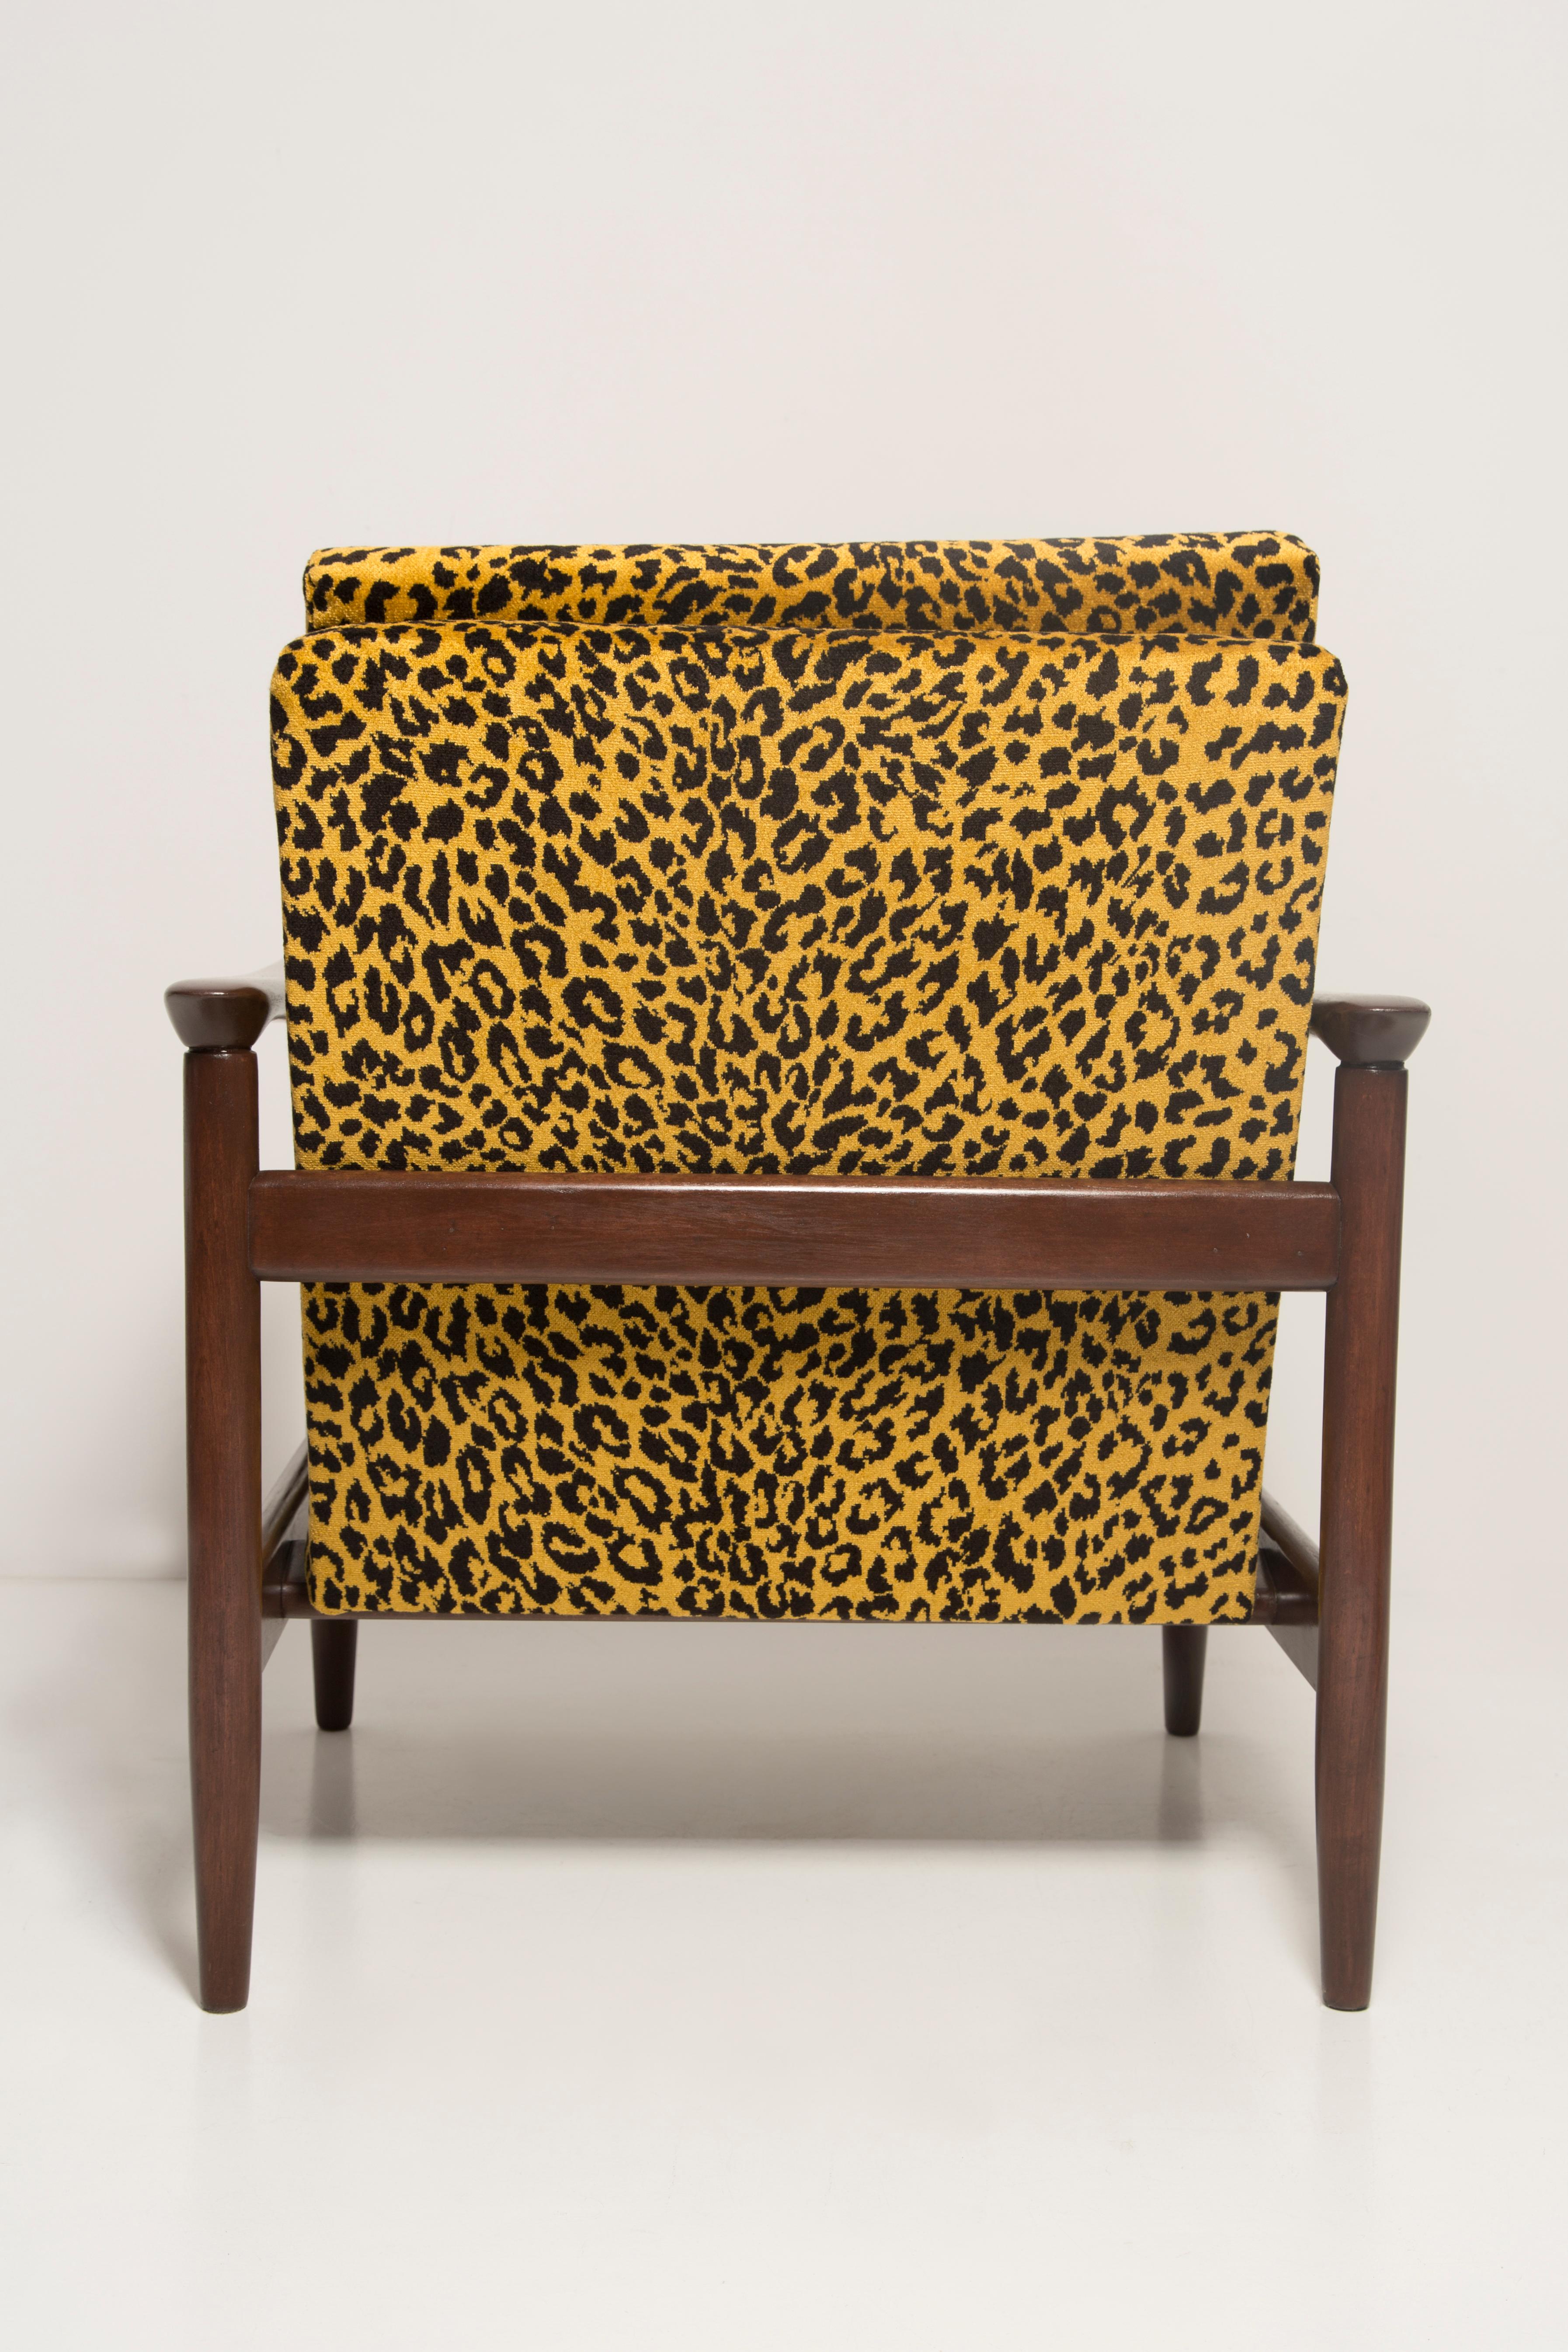 Pair of Midcentury Leopard Armchairs, GFM 142, Edmund Homa, Europe, 1960s For Sale 3